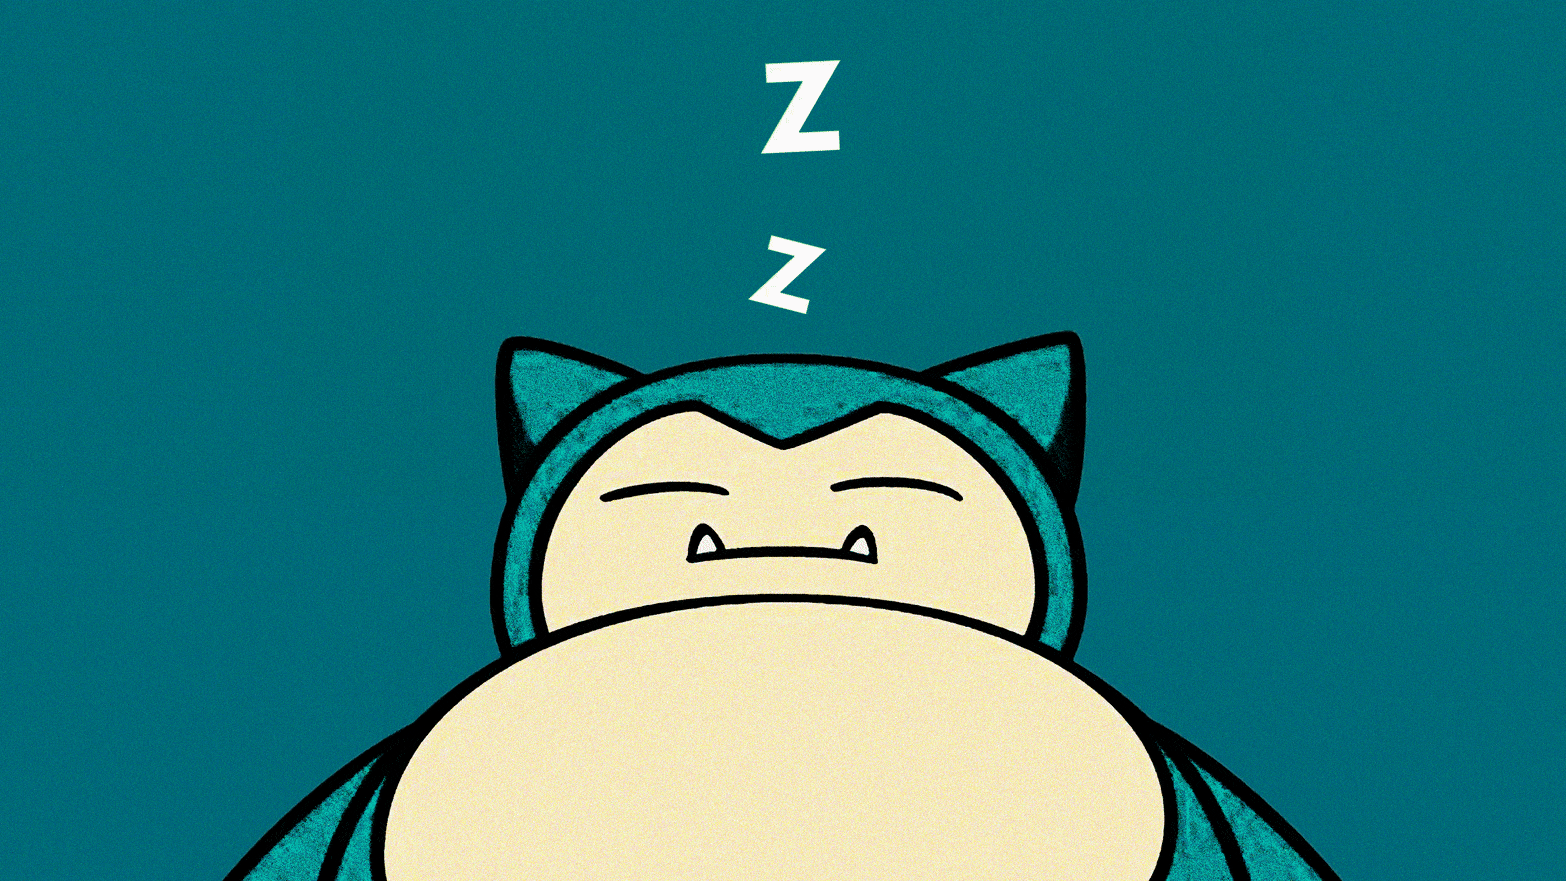 It's Time to Hit the Pillow and Play Pokémon Sleep